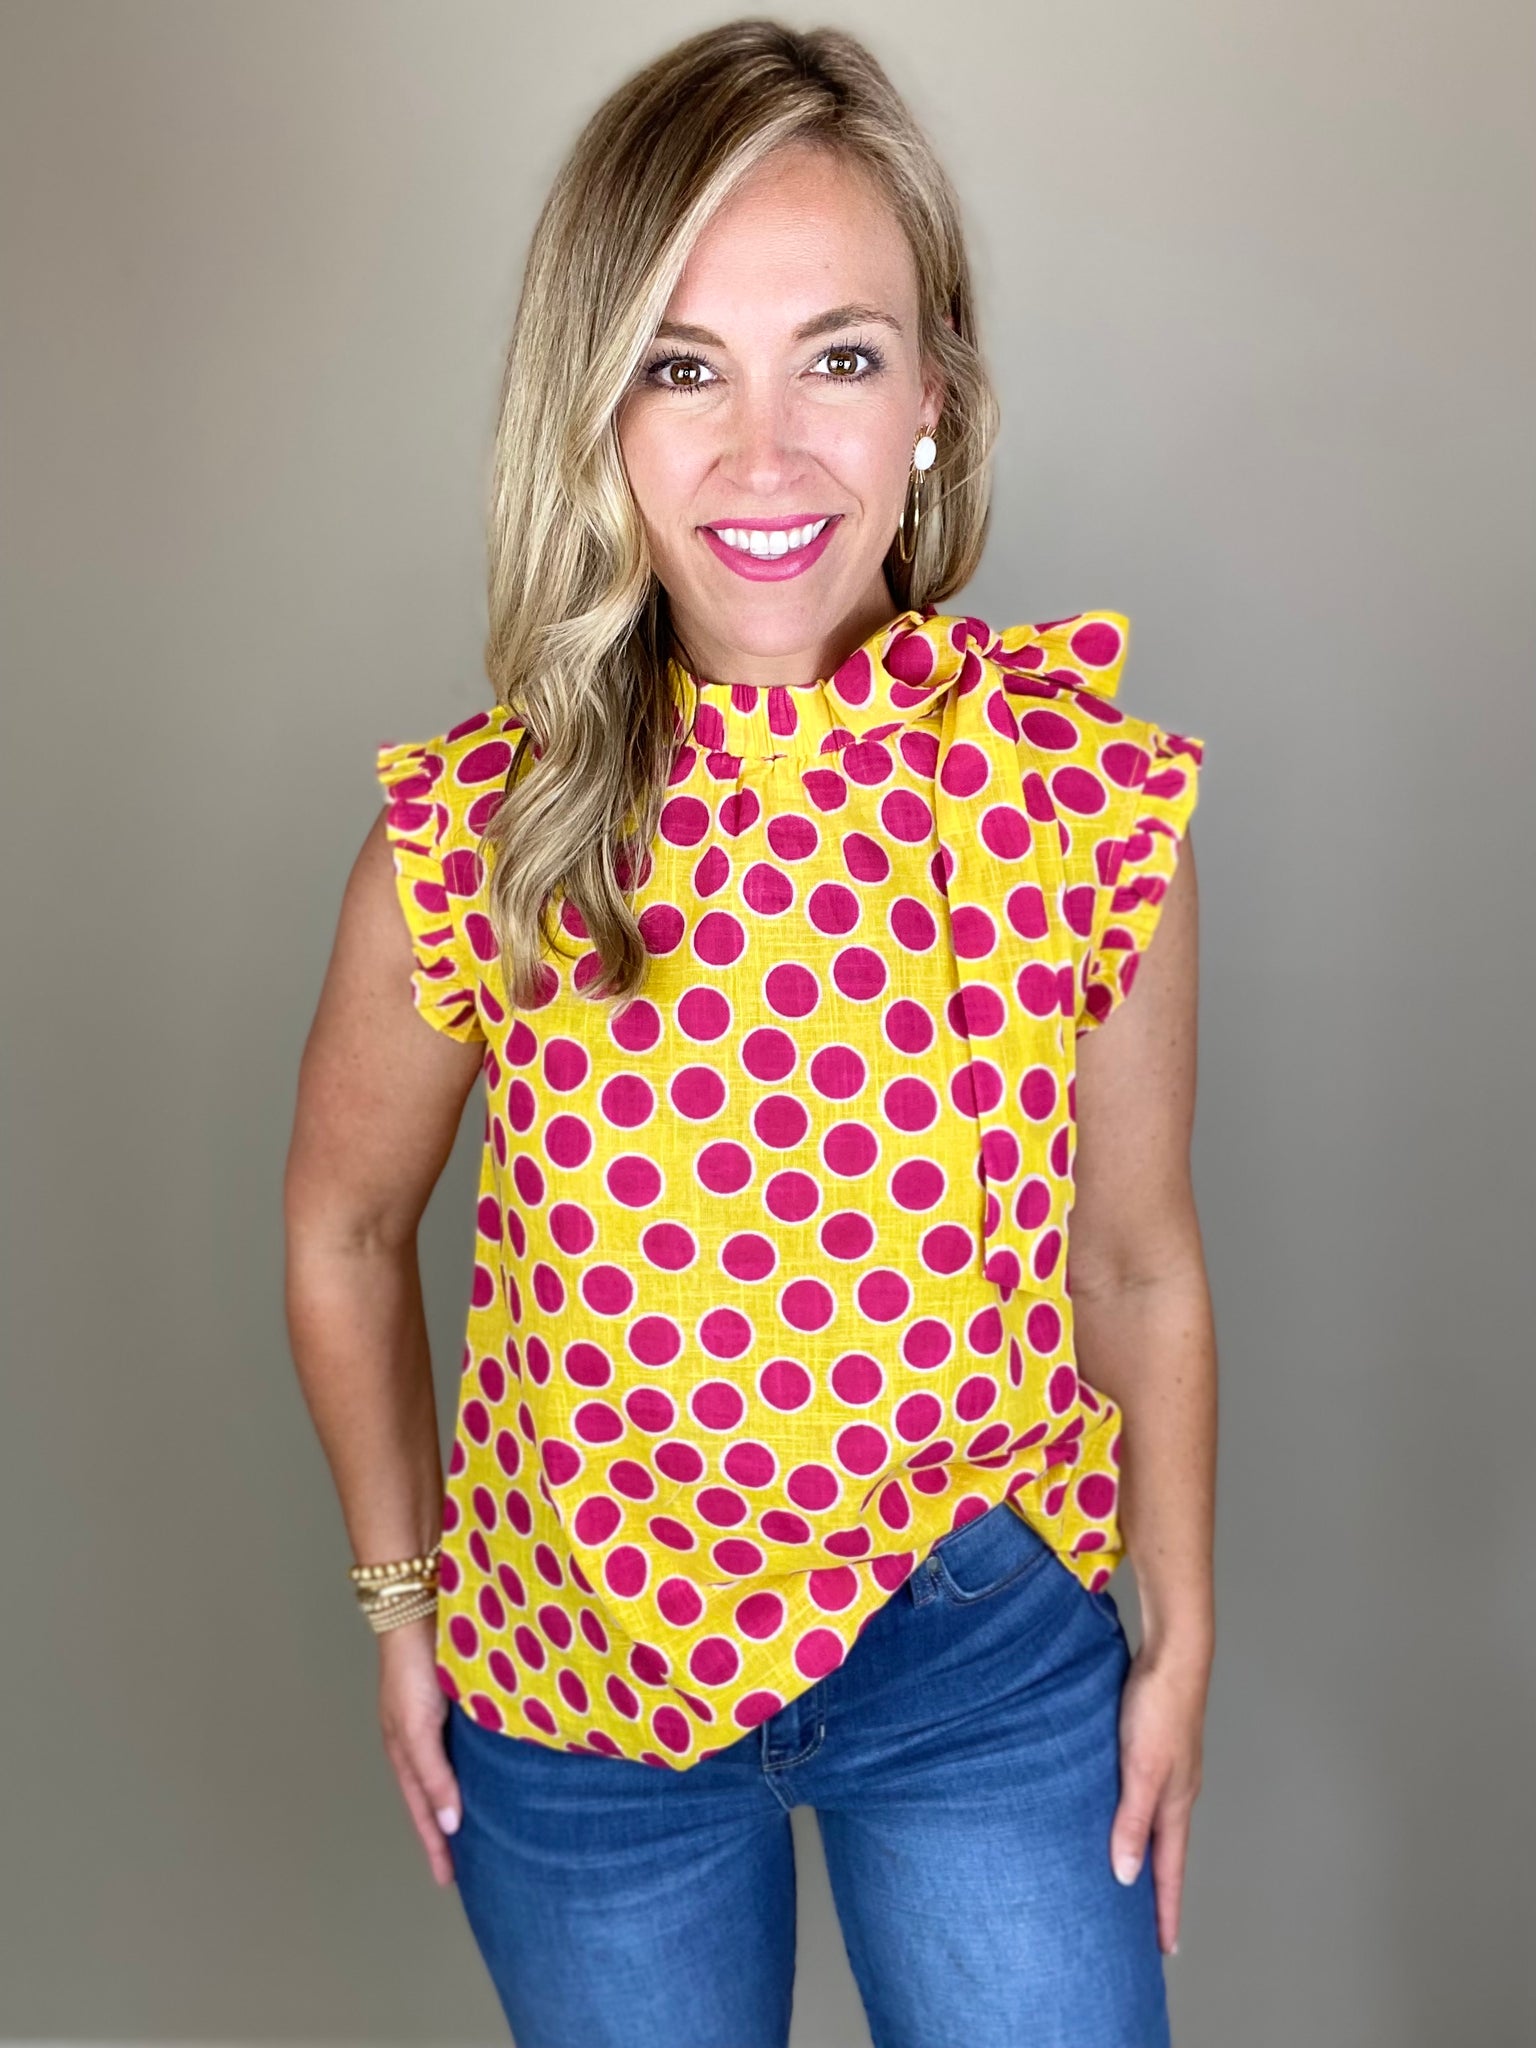 Dot and Tie Top